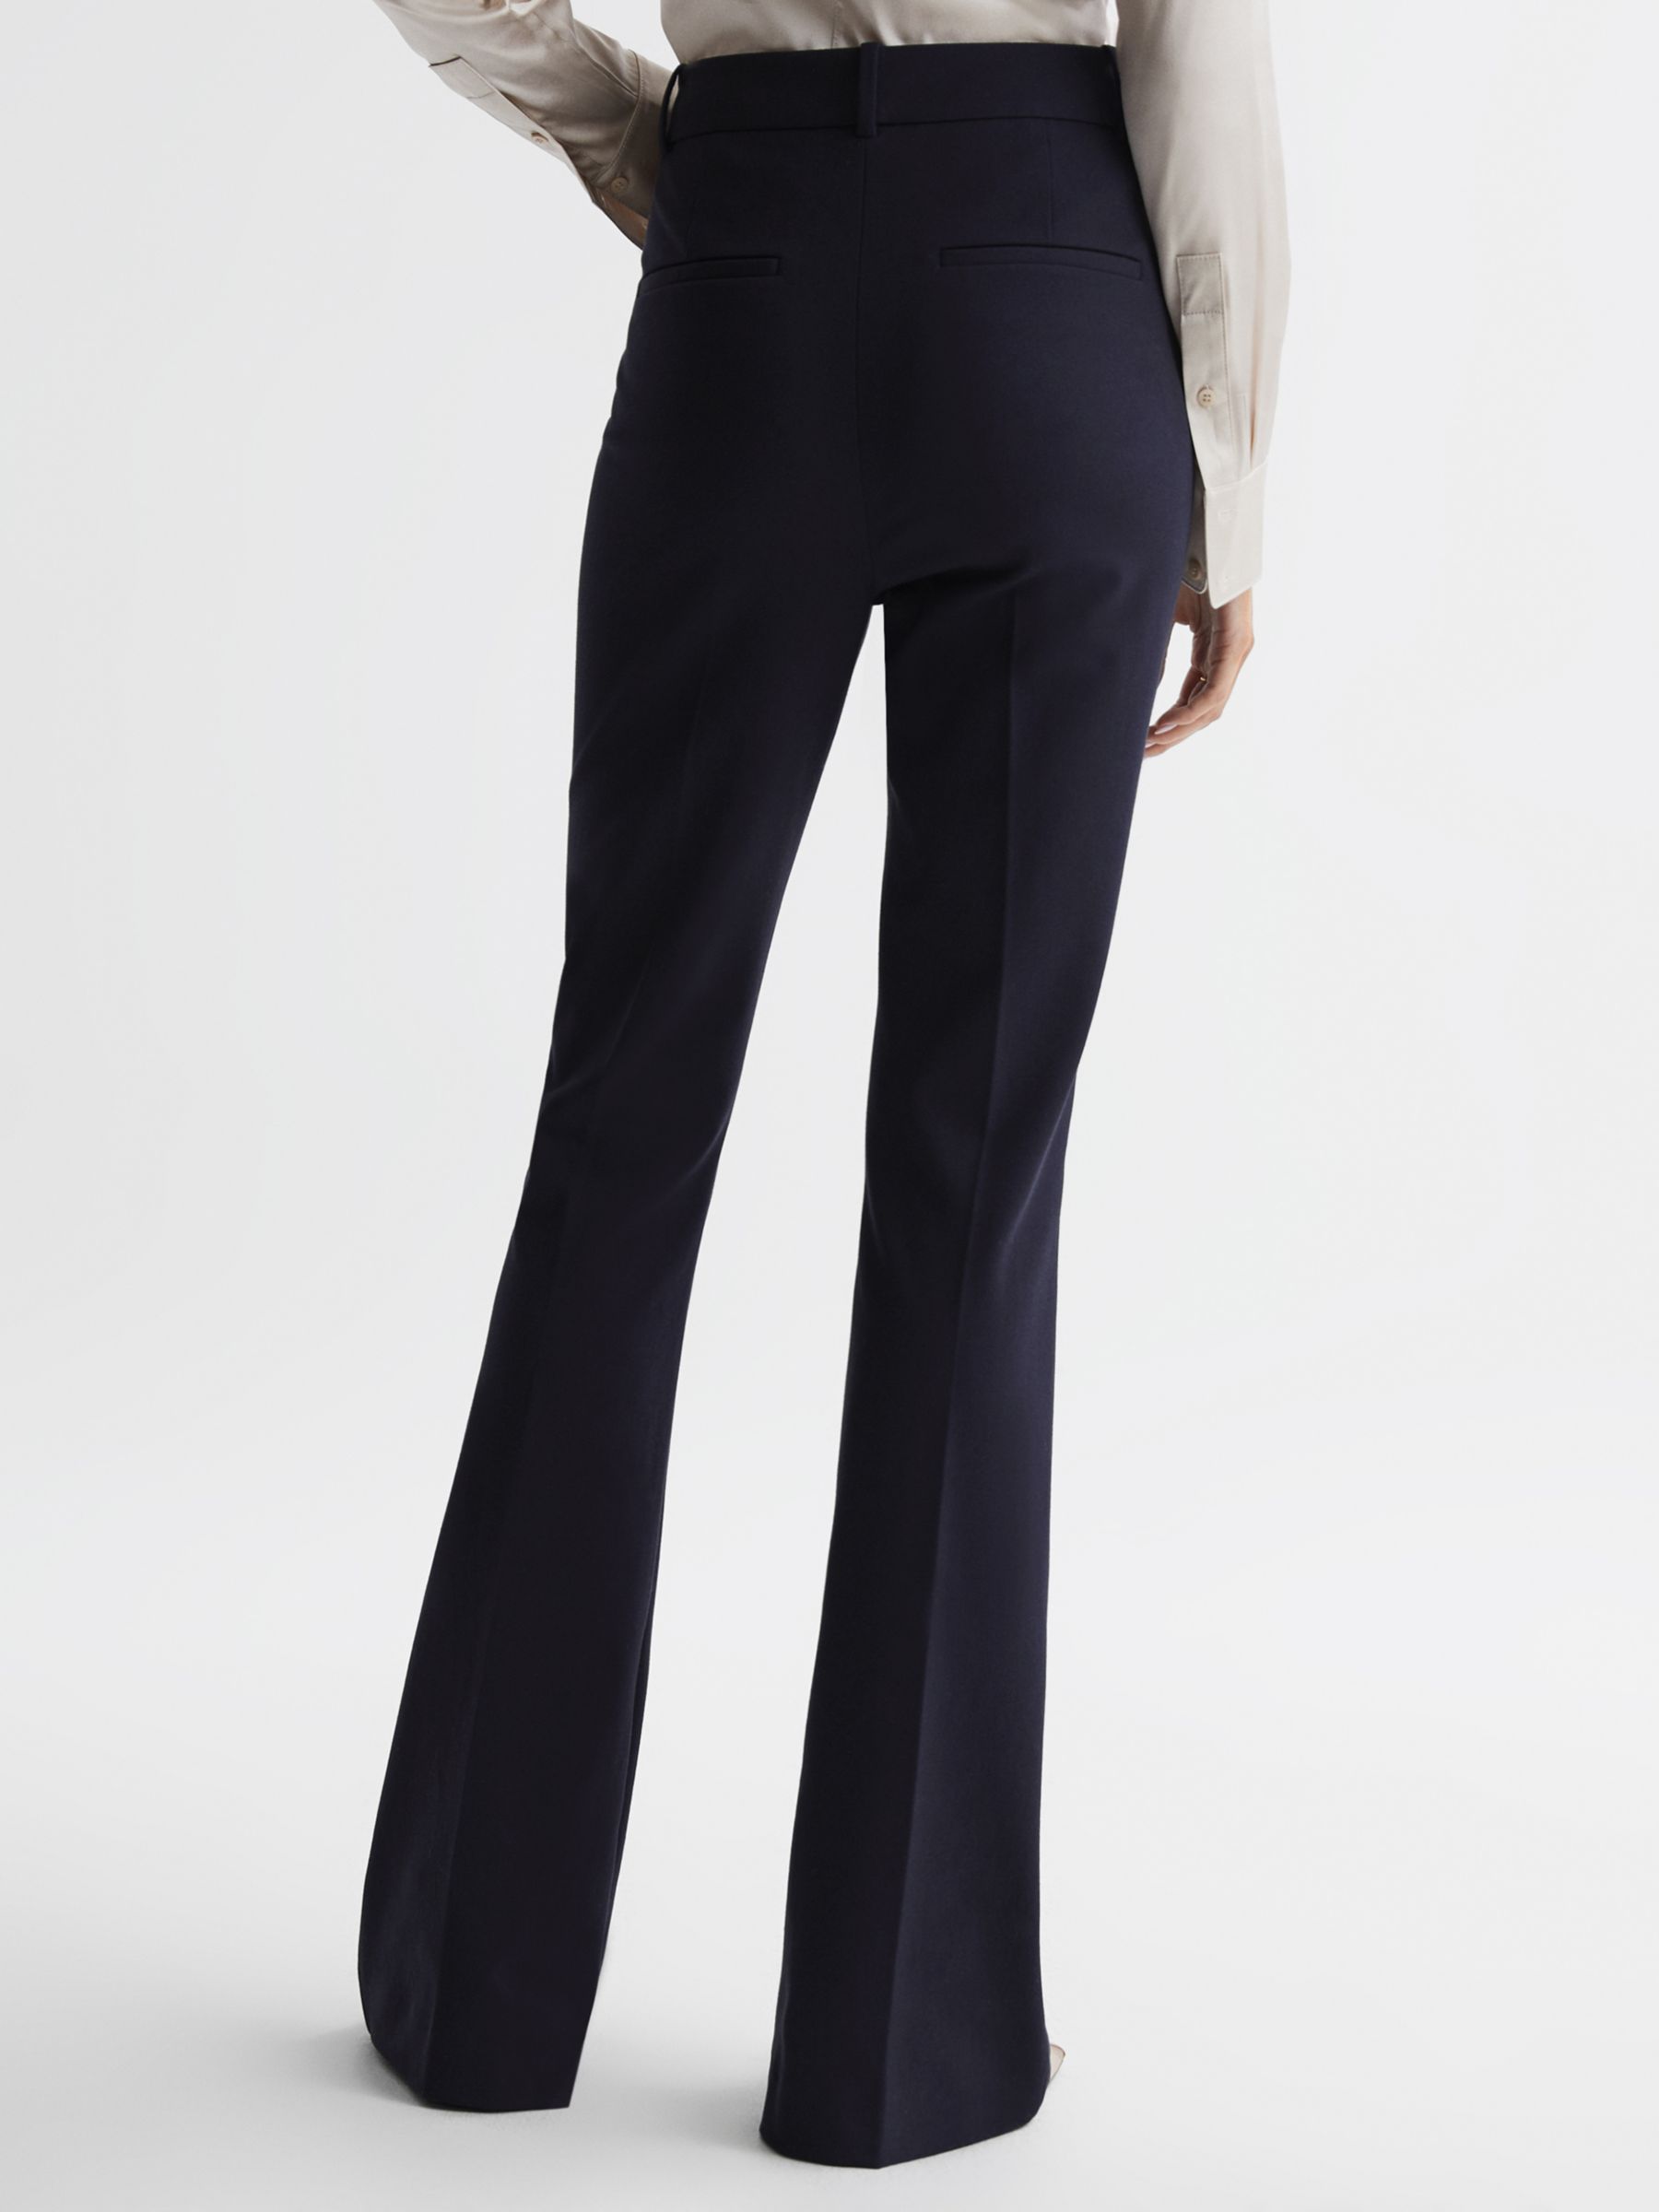 Reiss Dylan Flared Trousers, Navy at John Lewis & Partners